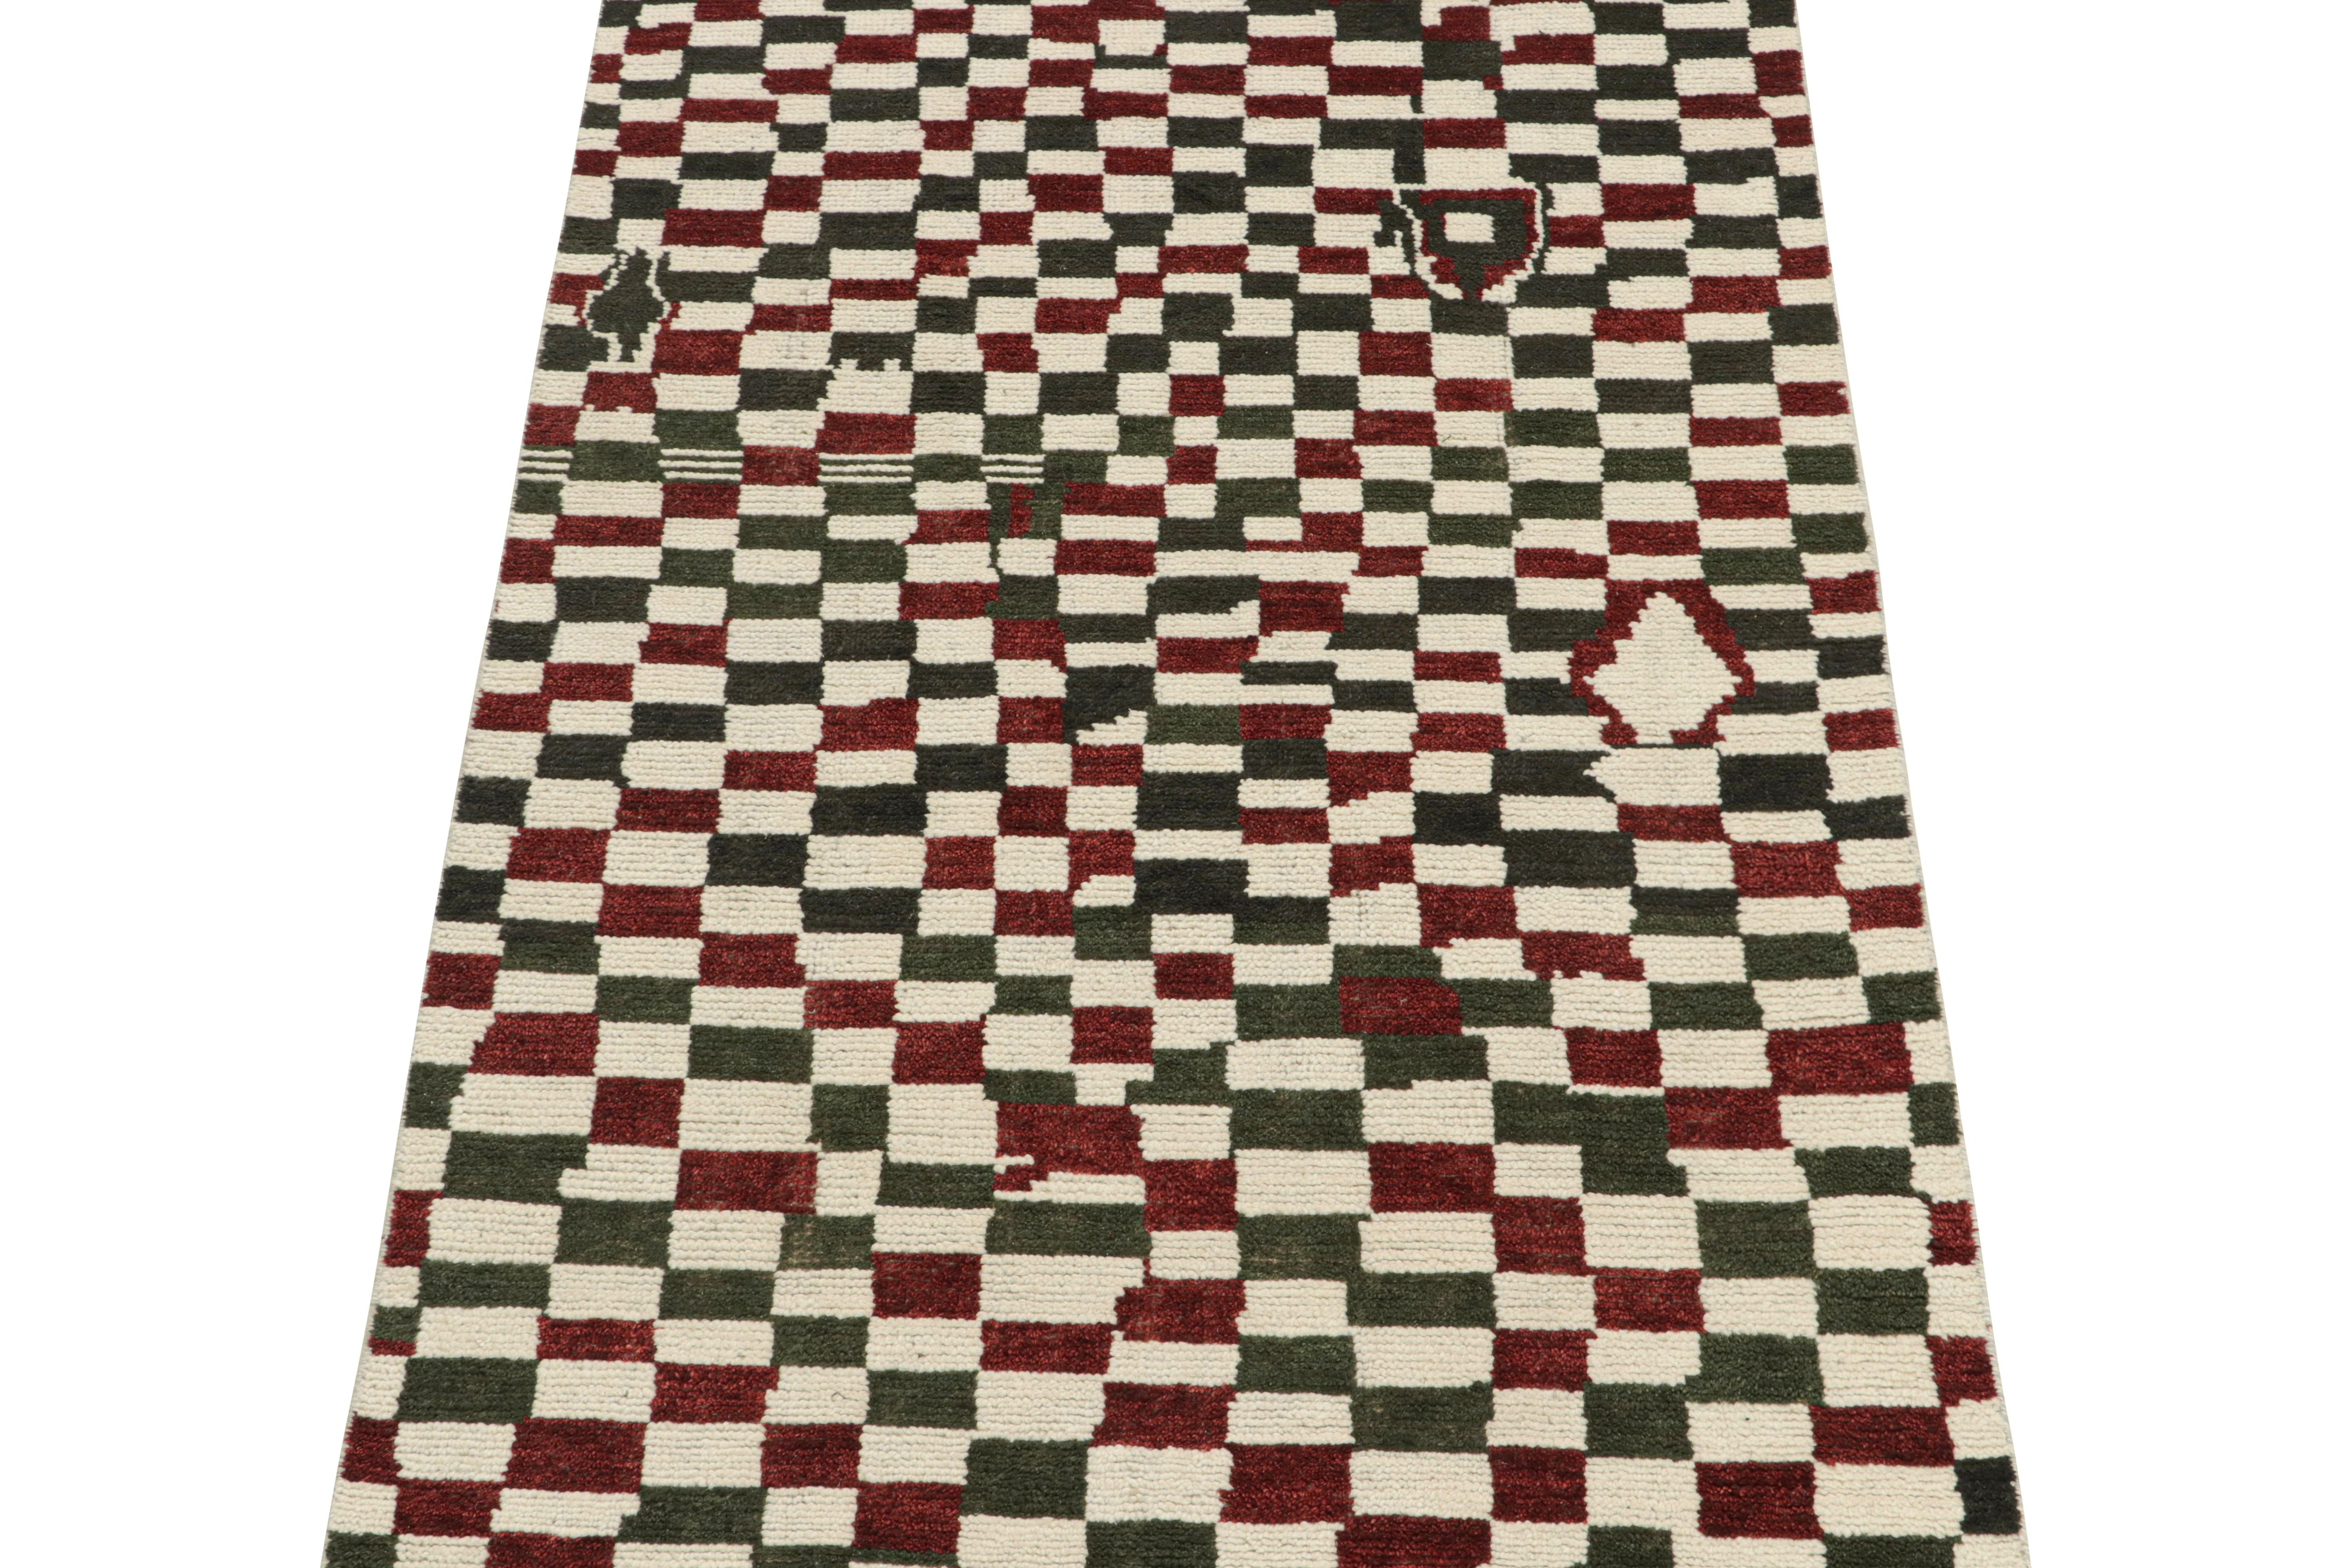 This contemporary 4x8 rug is a grand entry in Rug & Kilim's new Moroccan Collection—a bold take on the iconic style. Hand-knotted in wool, silk, and cotton.
Further on the Design:
The piece draws on archaic checker patterns and lozenges in white,